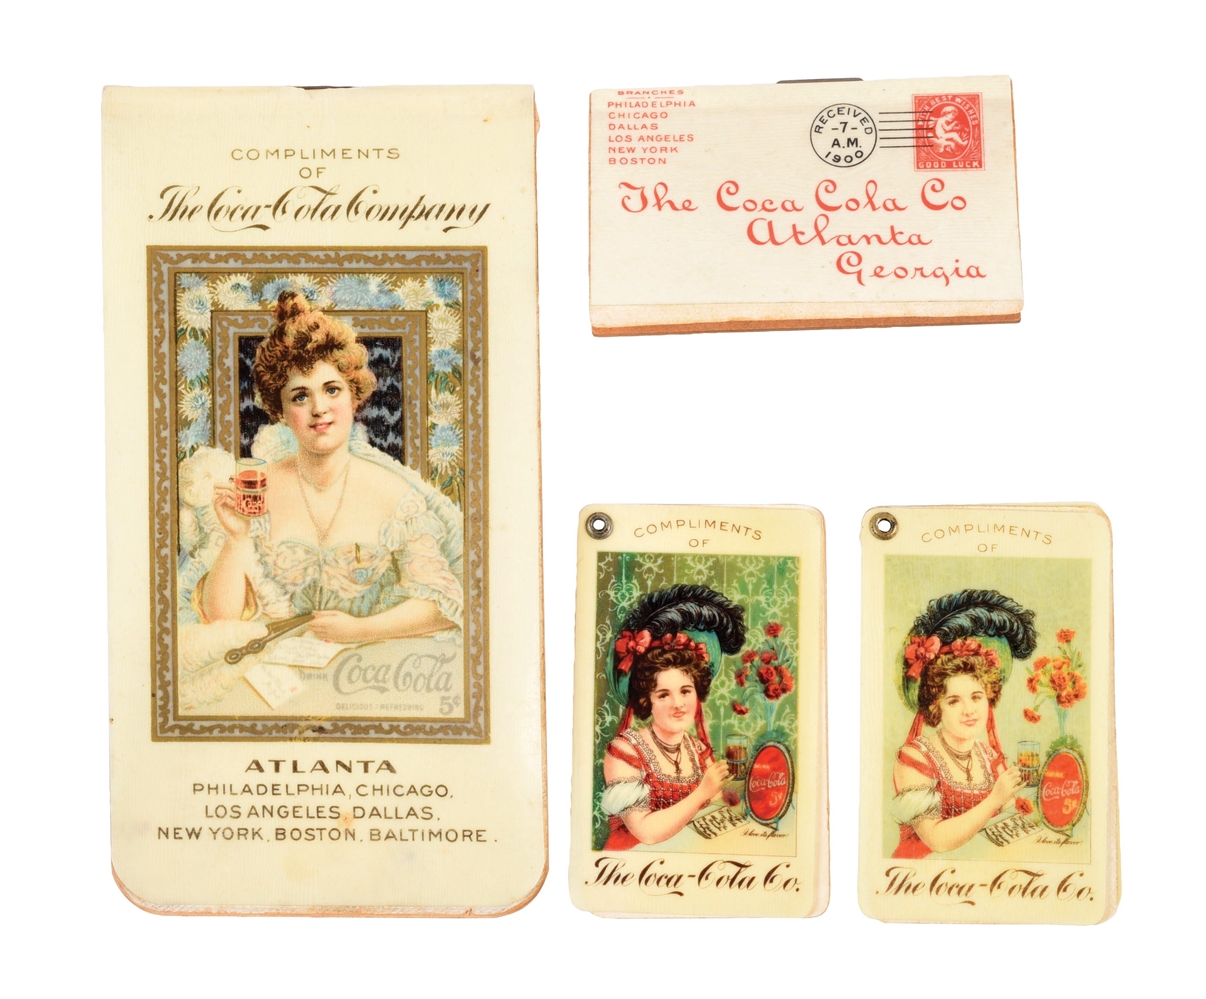 COLLECTION OF 4 EARLY COCA-COLA CELLULOID ADVERTISING ITEMS